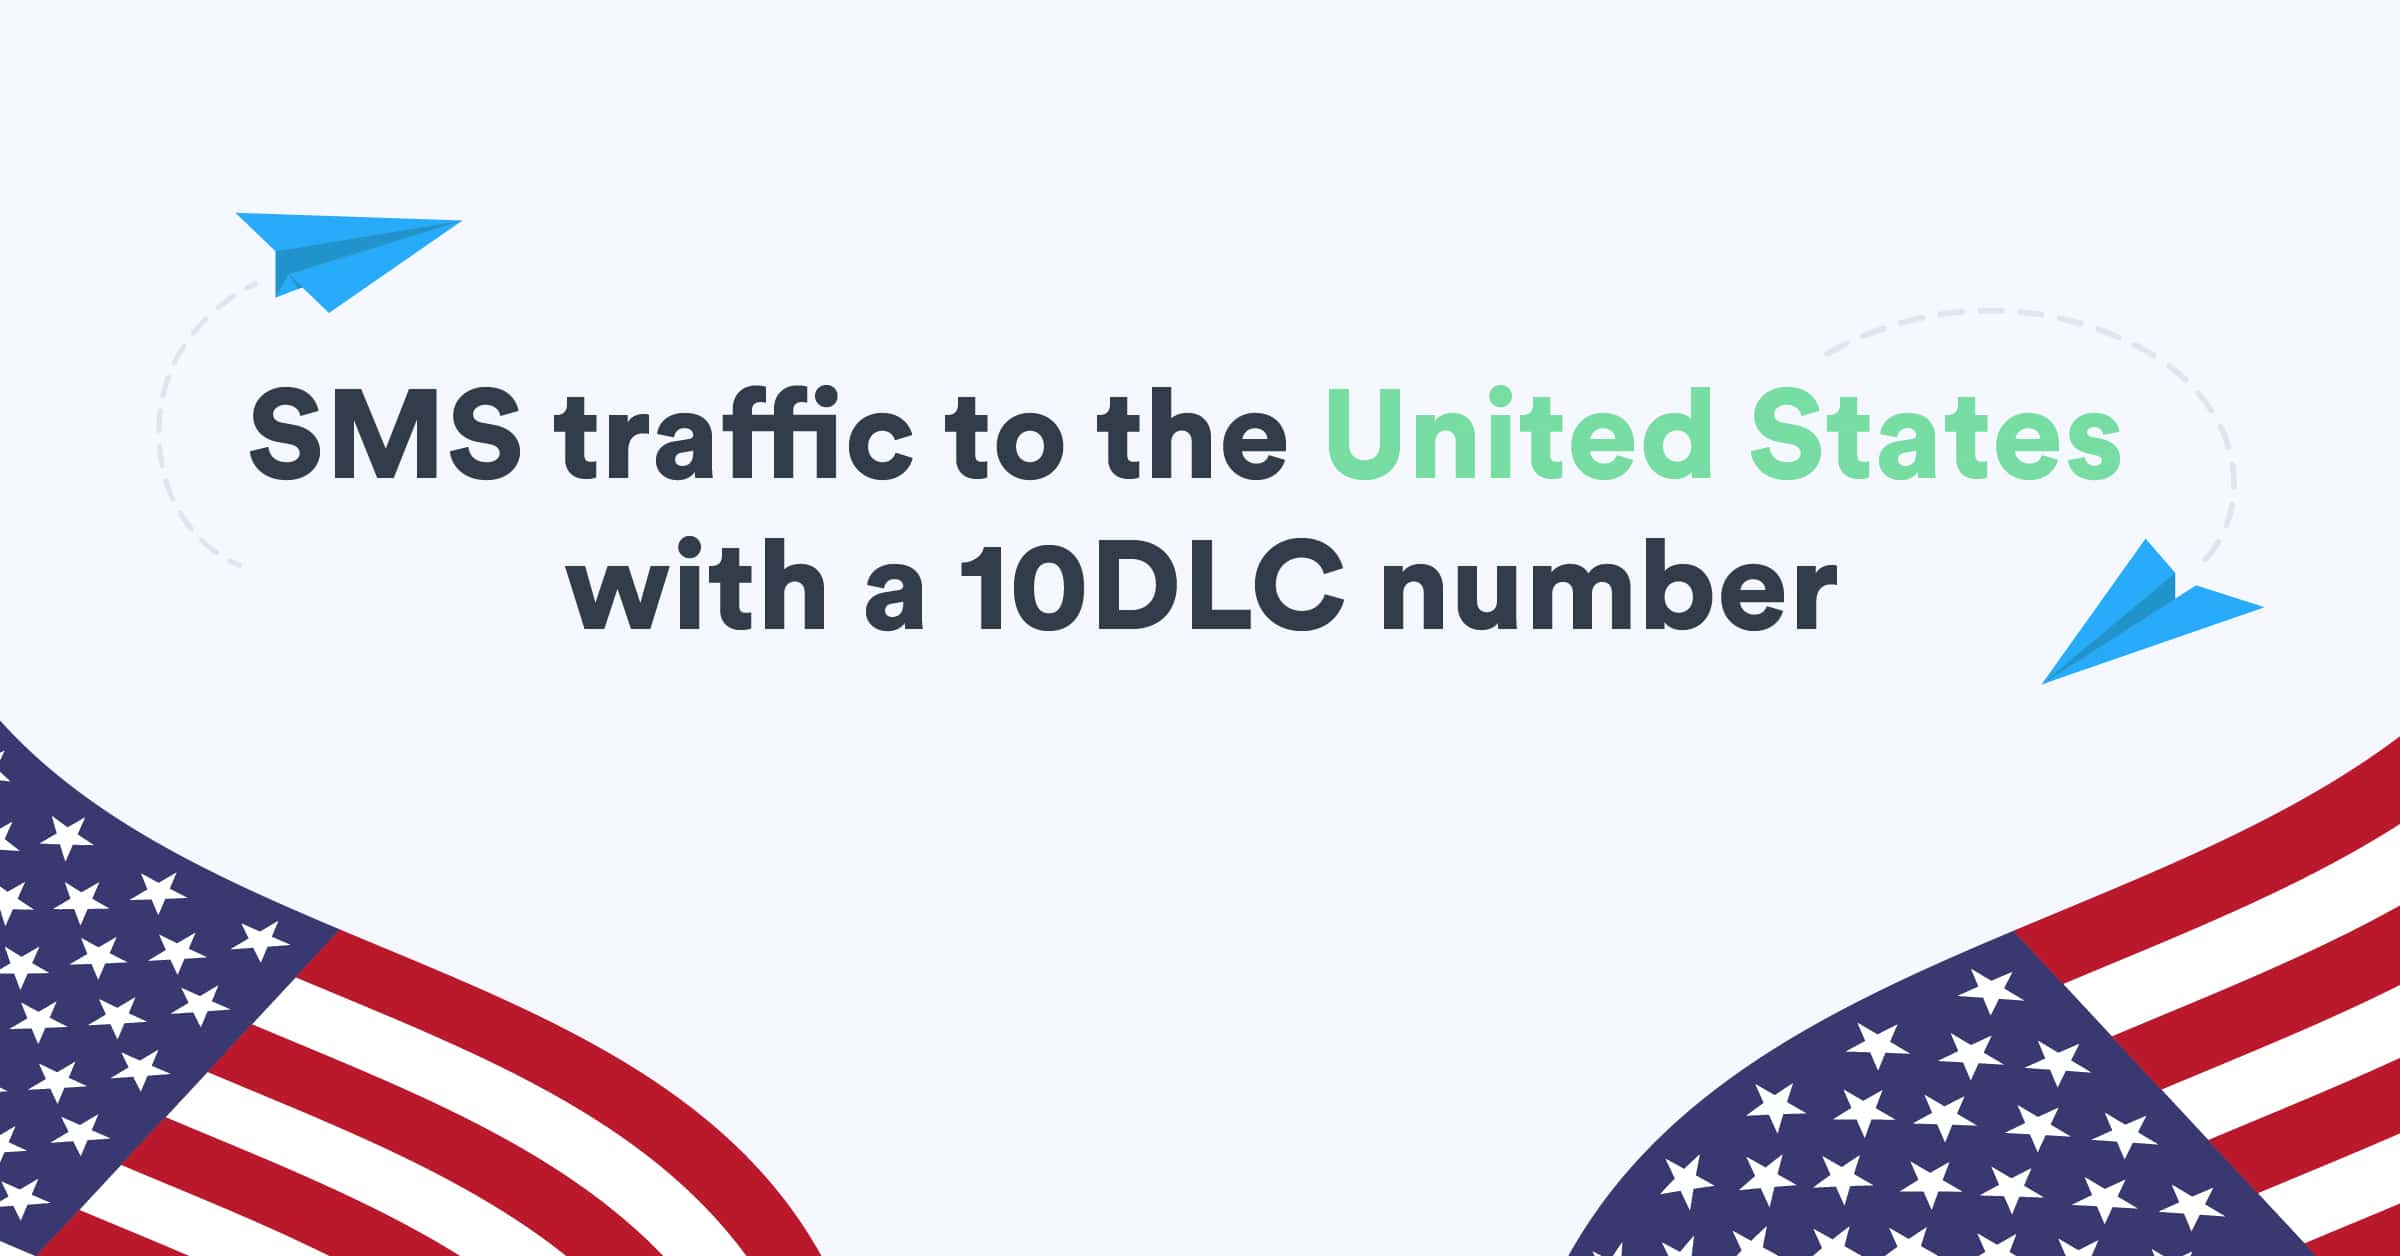 Get started sending SMS traffic to the United States with a 10DLC number